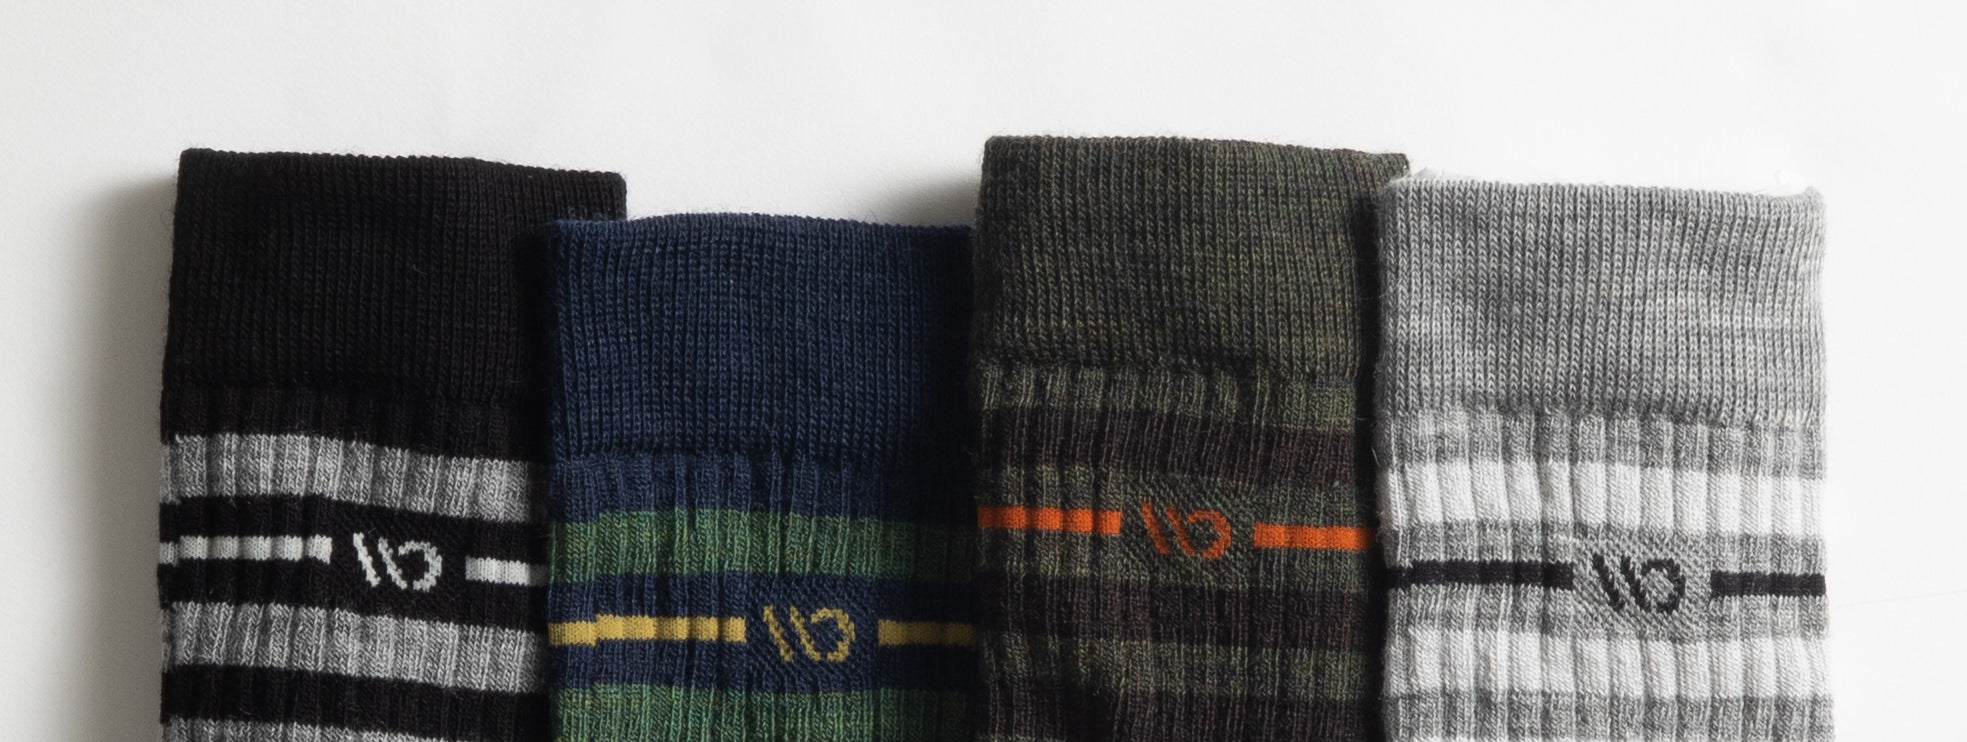 The top of four different colors socks of the Men's Vintage Stripe Cushioned Crew Socks.